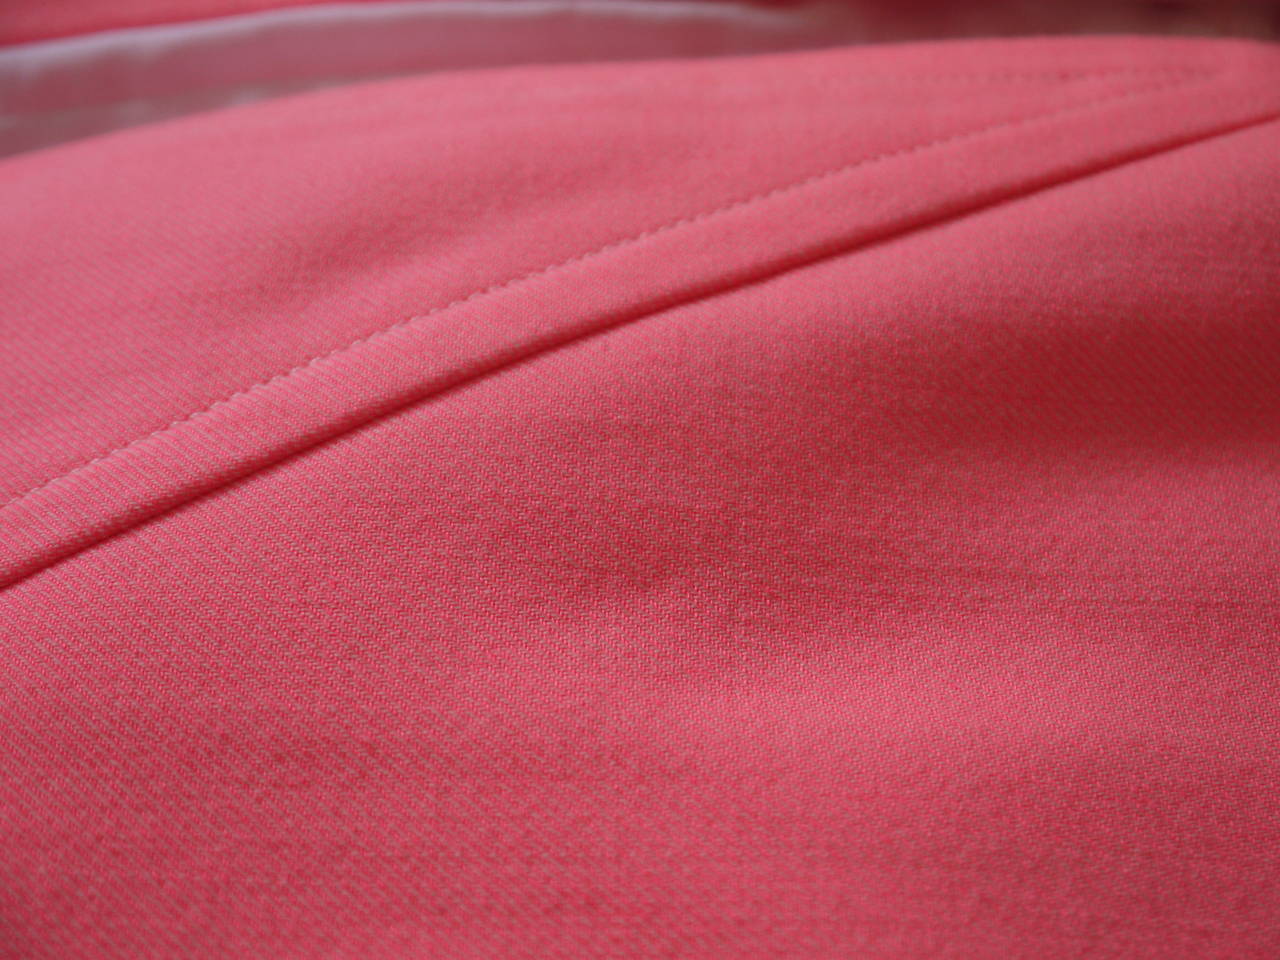 New Courreges Pink Dress - Size 40 For Sale 6